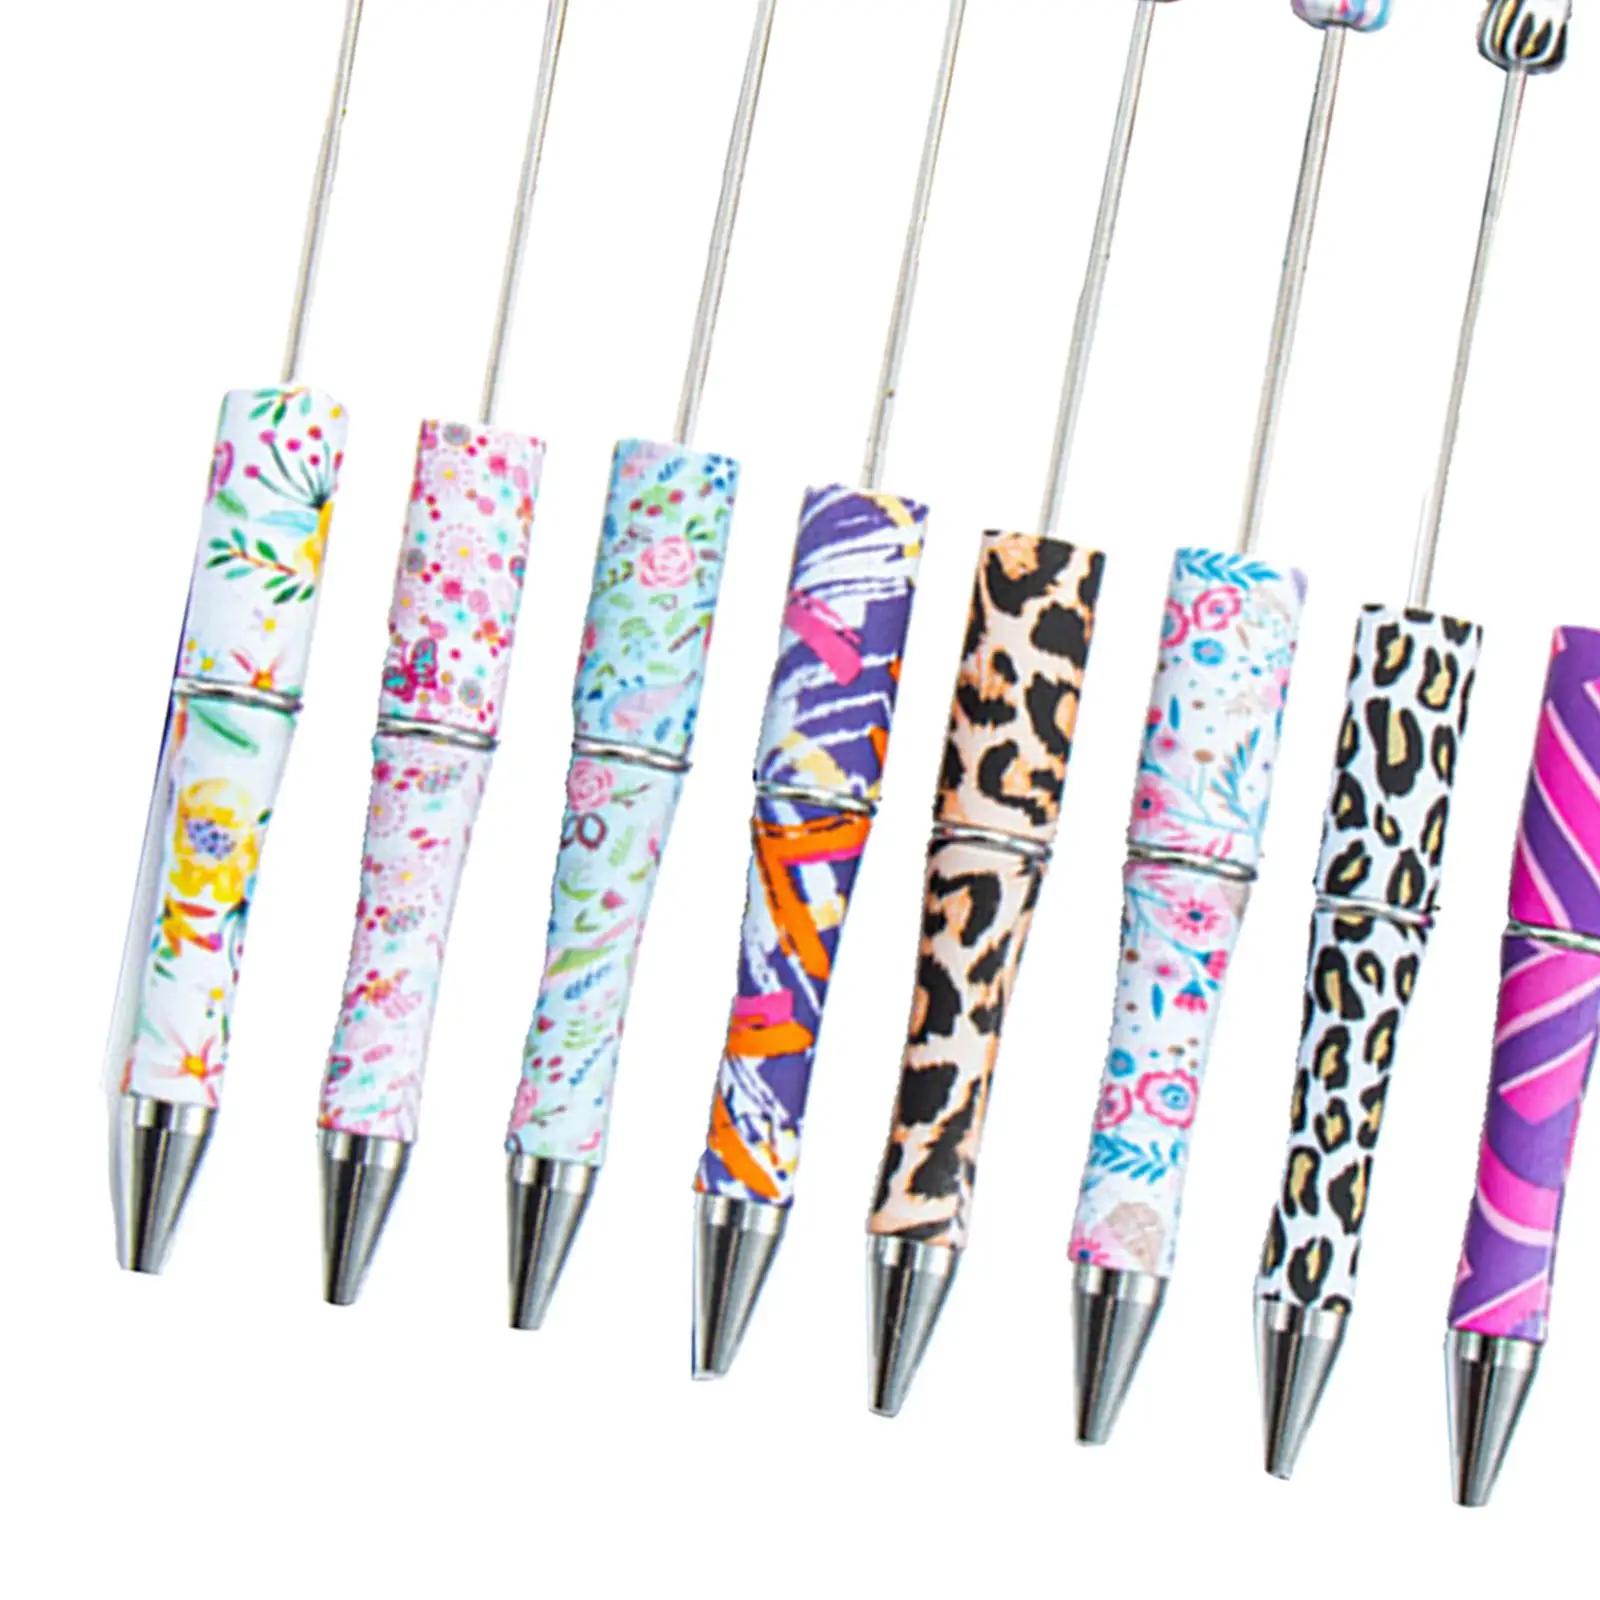 10Pcs Beaded Pen Multicolor Printable Ballpoint Pen Bead Pen Creative for Exam Spare Drawing DIY Making Classroom Students Gifts